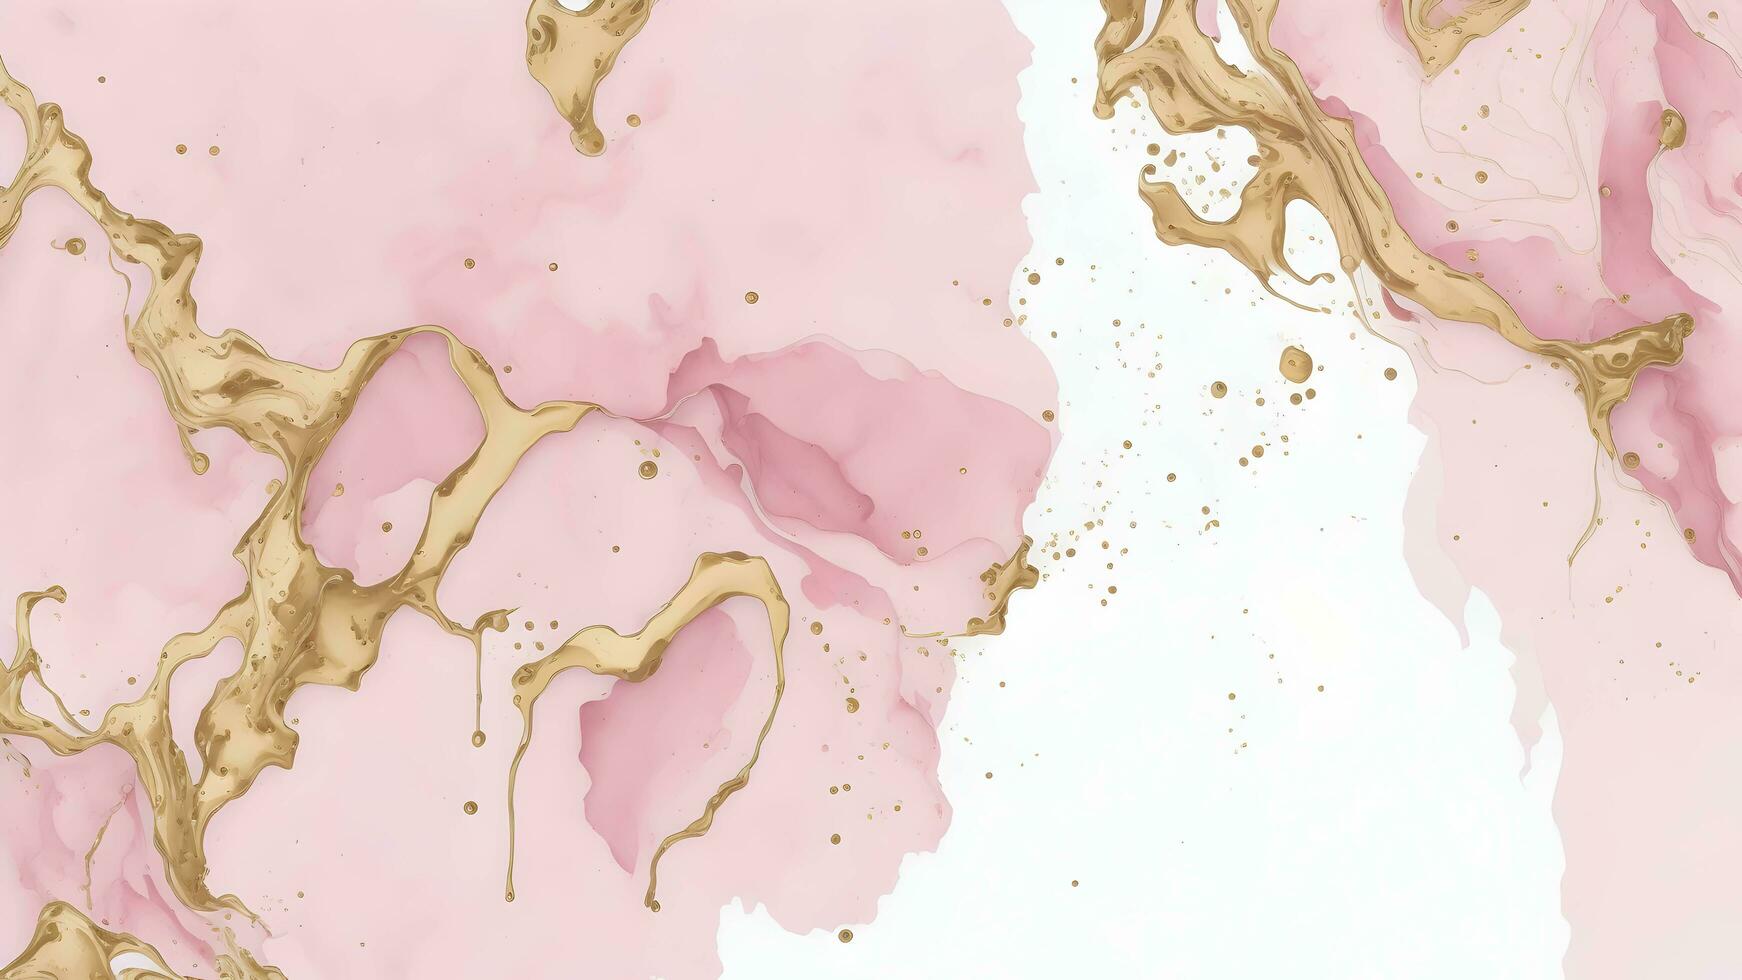 Abstract rose blush liquid watercolor background with golden lines, dots and stains photo